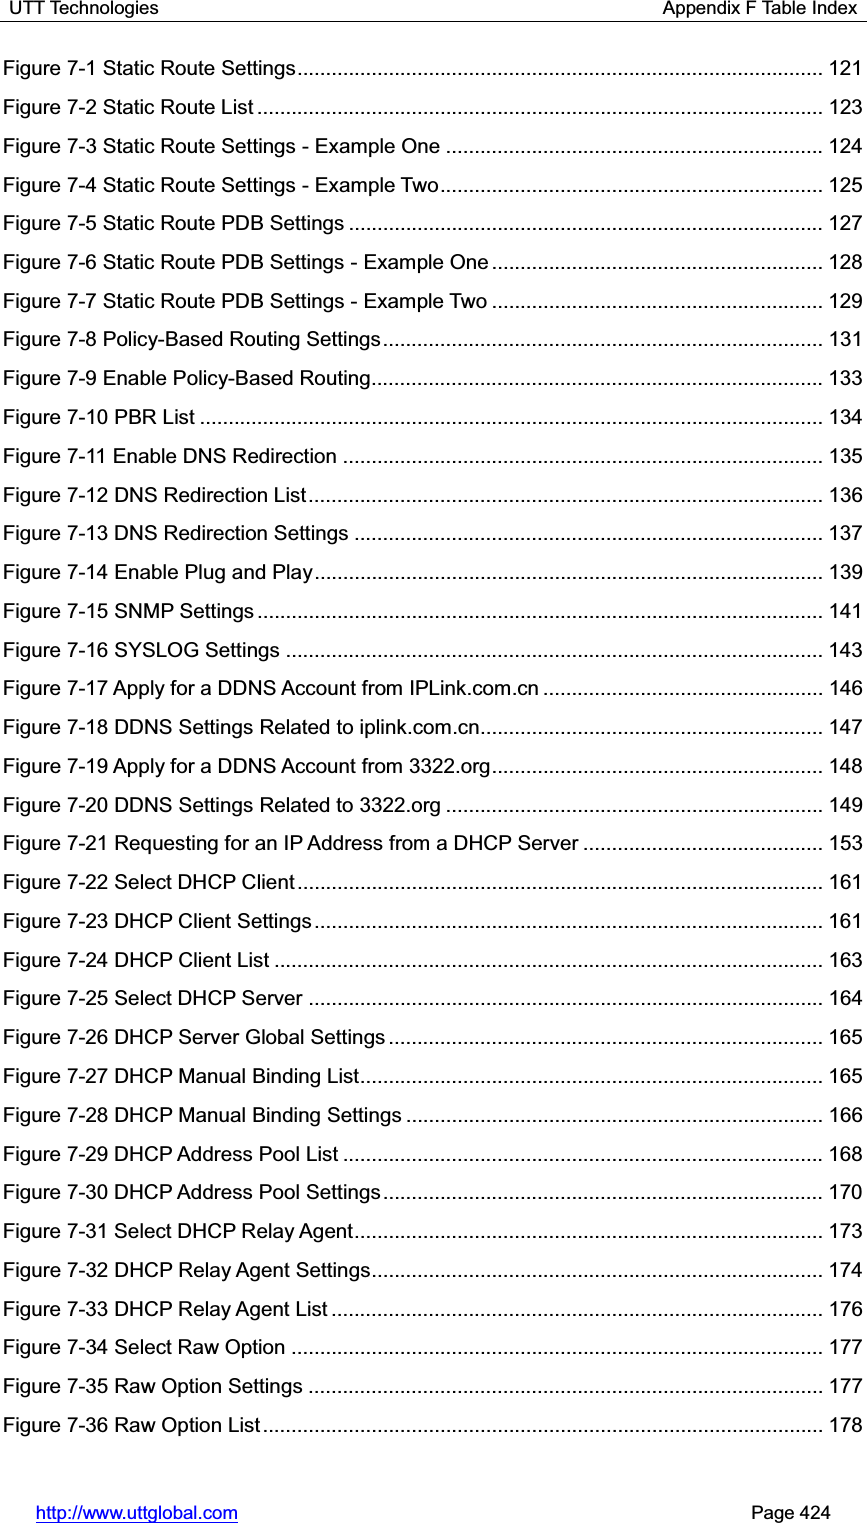 UTT Technologies                                                      Appendix F Table Index http://www.uttglobal.com                                                       Page 424 Figure 7-1 Static Route Settings ............................................................................................ 121Figure 7-2 Static Route List ................................................................................................... 123Figure 7-3 Static Route Settings - Example One .................................................................. 124Figure 7-4 Static Route Settings - Example Two ................................................................... 125Figure 7-5 Static Route PDB Settings ................................................................................... 127Figure 7-6 Static Route PDB Settings - Example One .......................................................... 128Figure 7-7 Static Route PDB Settings - Example Two .......................................................... 129Figure 7-8 Policy-Based Routing Settings ............................................................................. 131Figure 7-9 Enable Policy-Based Routing............................................................................... 133Figure 7-10 PBR List ............................................................................................................. 134Figure 7-11 Enable DNS Redirection .................................................................................... 135Figure 7-12 DNS Redirection List .......................................................................................... 136Figure 7-13 DNS Redirection Settings .................................................................................. 137Figure 7-14 Enable Plug and Play ......................................................................................... 139Figure 7-15 SNMP Settings ................................................................................................... 141Figure 7-16 SYSLOG Settings .............................................................................................. 143Figure 7-17 Apply for a DDNS Account from IPLink.com.cn ................................................. 146Figure 7-18 DDNS Settings Related to iplink.com.cn ............................................................ 147Figure 7-19 Apply for a DDNS Account from 3322.org .......................................................... 148Figure 7-20 DDNS Settings Related to 3322.org .................................................................. 149Figure 7-21 Requesting for an IP Address from a DHCP Server .......................................... 153Figure 7-22 Select DHCP Client ............................................................................................ 161Figure 7-23 DHCP Client Settings ......................................................................................... 161Figure 7-24 DHCP Client List ................................................................................................ 163Figure 7-25 Select DHCP Server .......................................................................................... 164Figure 7-26 DHCP Server Global Settings ............................................................................ 165Figure 7-27 DHCP Manual Binding List ................................................................................. 165Figure 7-28 DHCP Manual Binding Settings ......................................................................... 166Figure 7-29 DHCP Address Pool List .................................................................................... 168Figure 7-30 DHCP Address Pool Settings ............................................................................. 170Figure 7-31 Select DHCP Relay Agent .................................................................................. 173Figure 7-32 DHCP Relay Agent Settings ............................................................................... 174Figure 7-33 DHCP Relay Agent List ...................................................................................... 176Figure 7-34 Select Raw Option ............................................................................................. 177Figure 7-35 Raw Option Settings .......................................................................................... 177Figure 7-36 Raw Option List .................................................................................................. 178